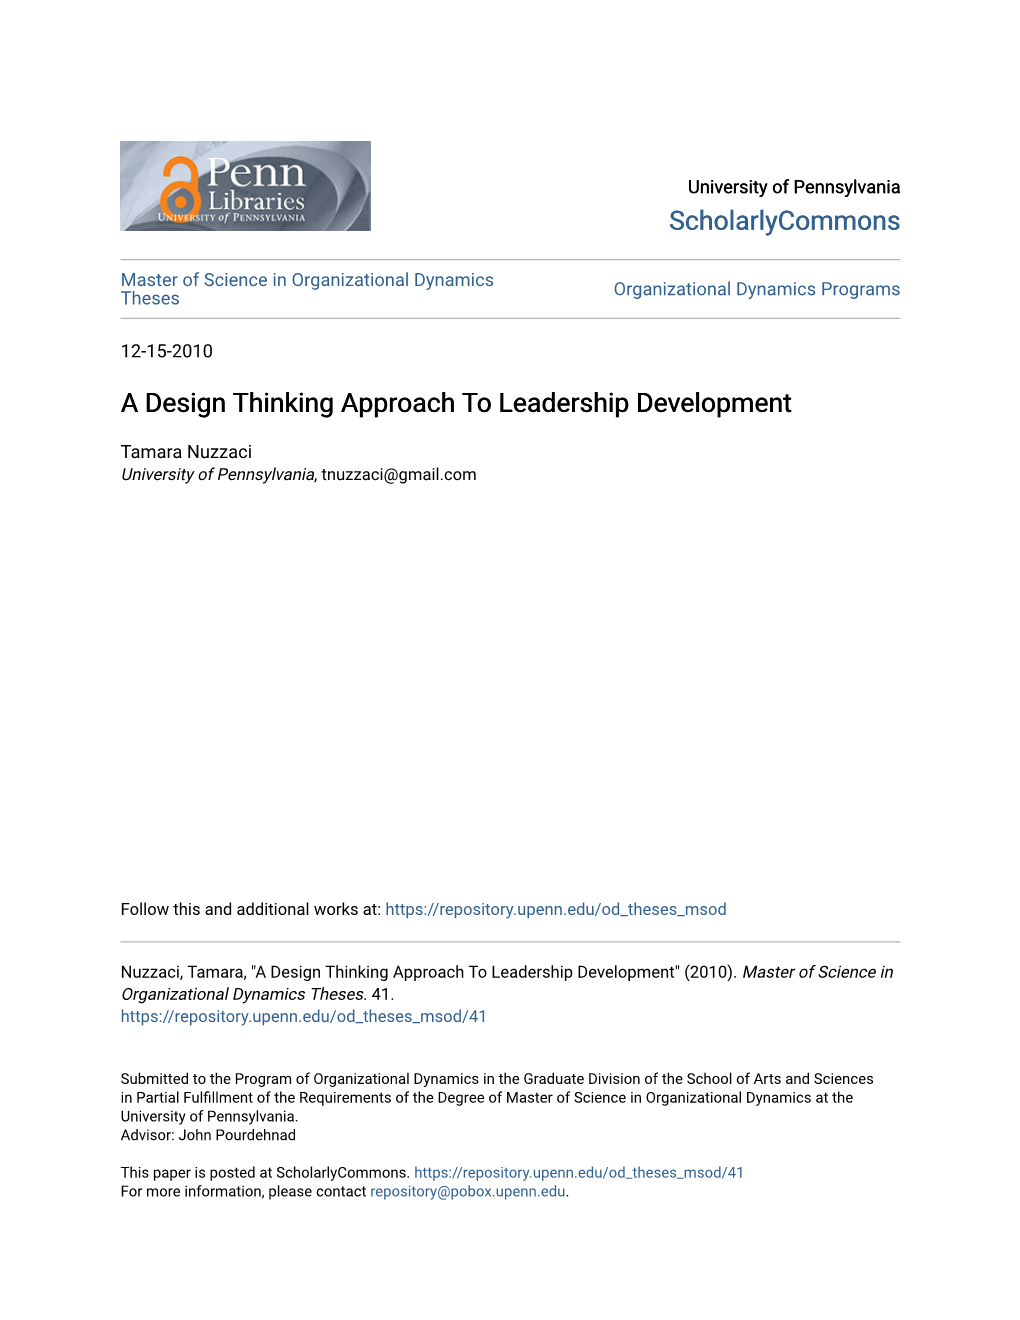 A Design Thinking Approach to Leadership Development